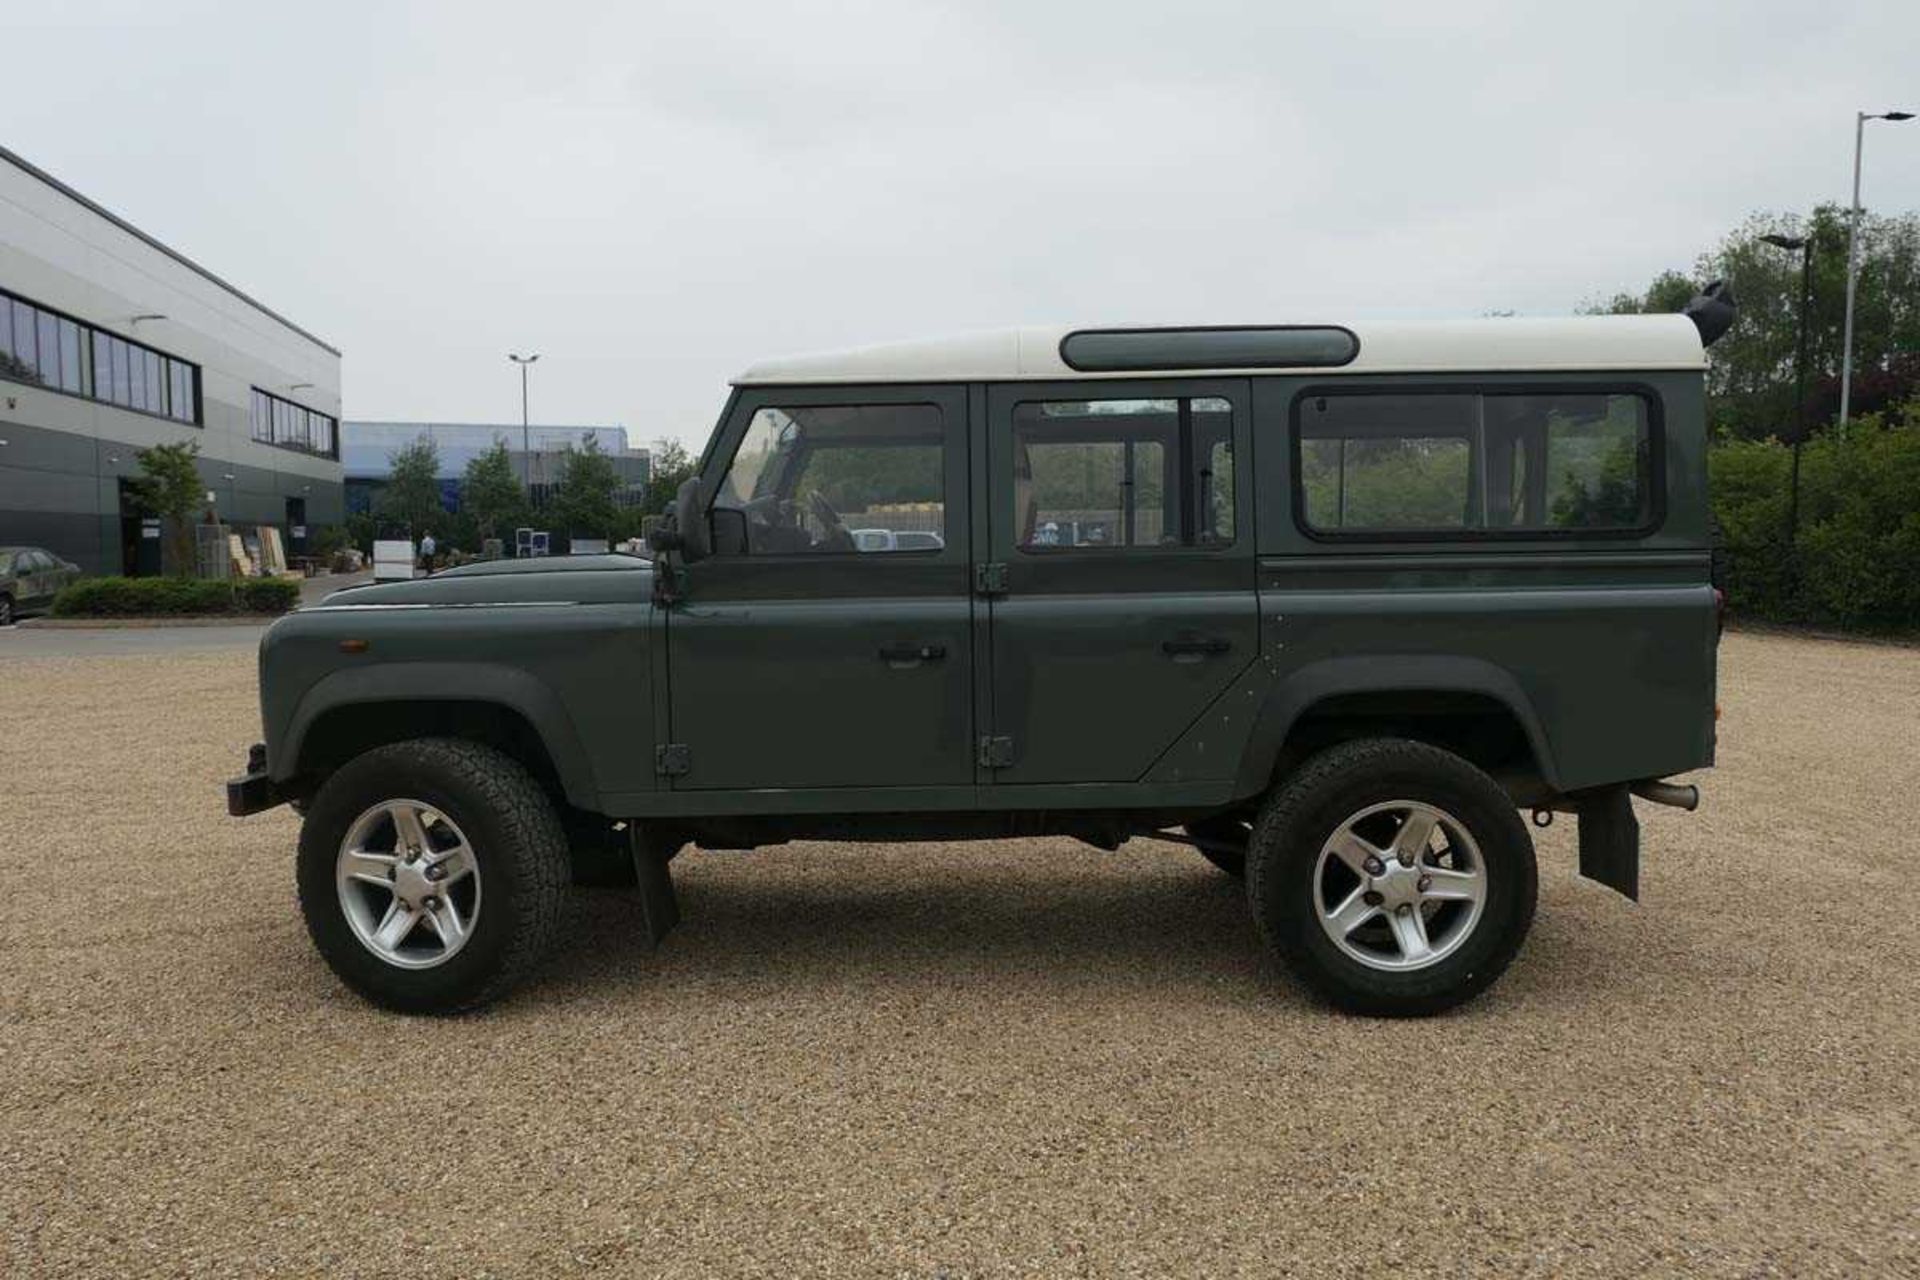 (LD58 NLV) 2008 Land Rover Defender 110 LWB station wagon estate in green, 2402cc diesel, 6-speed - Image 20 of 20